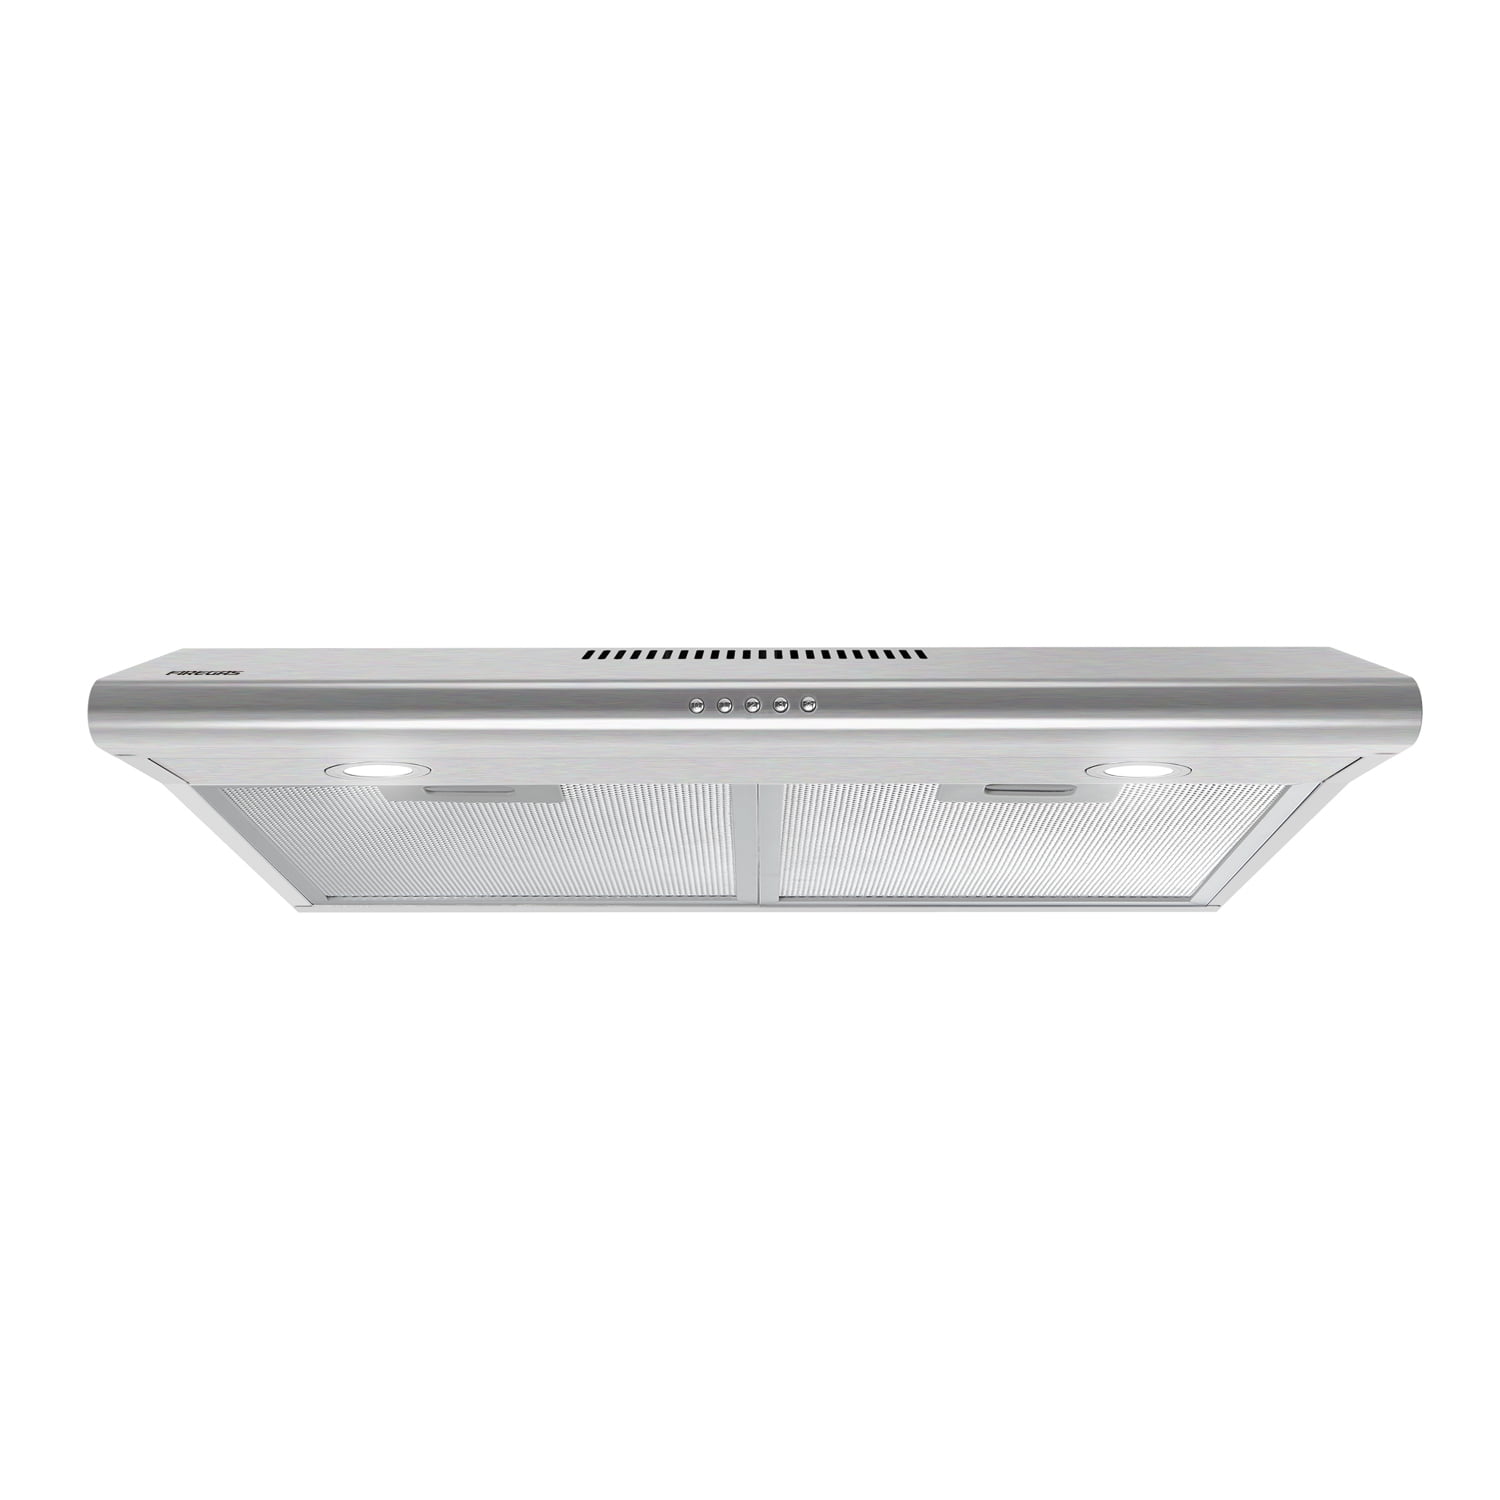  CIARRA Ductless Range Hood 30 inch Under Cabinet Hood Vent for  Kitchen Ducted and Ductless Convertible CAS75918A : Appliances